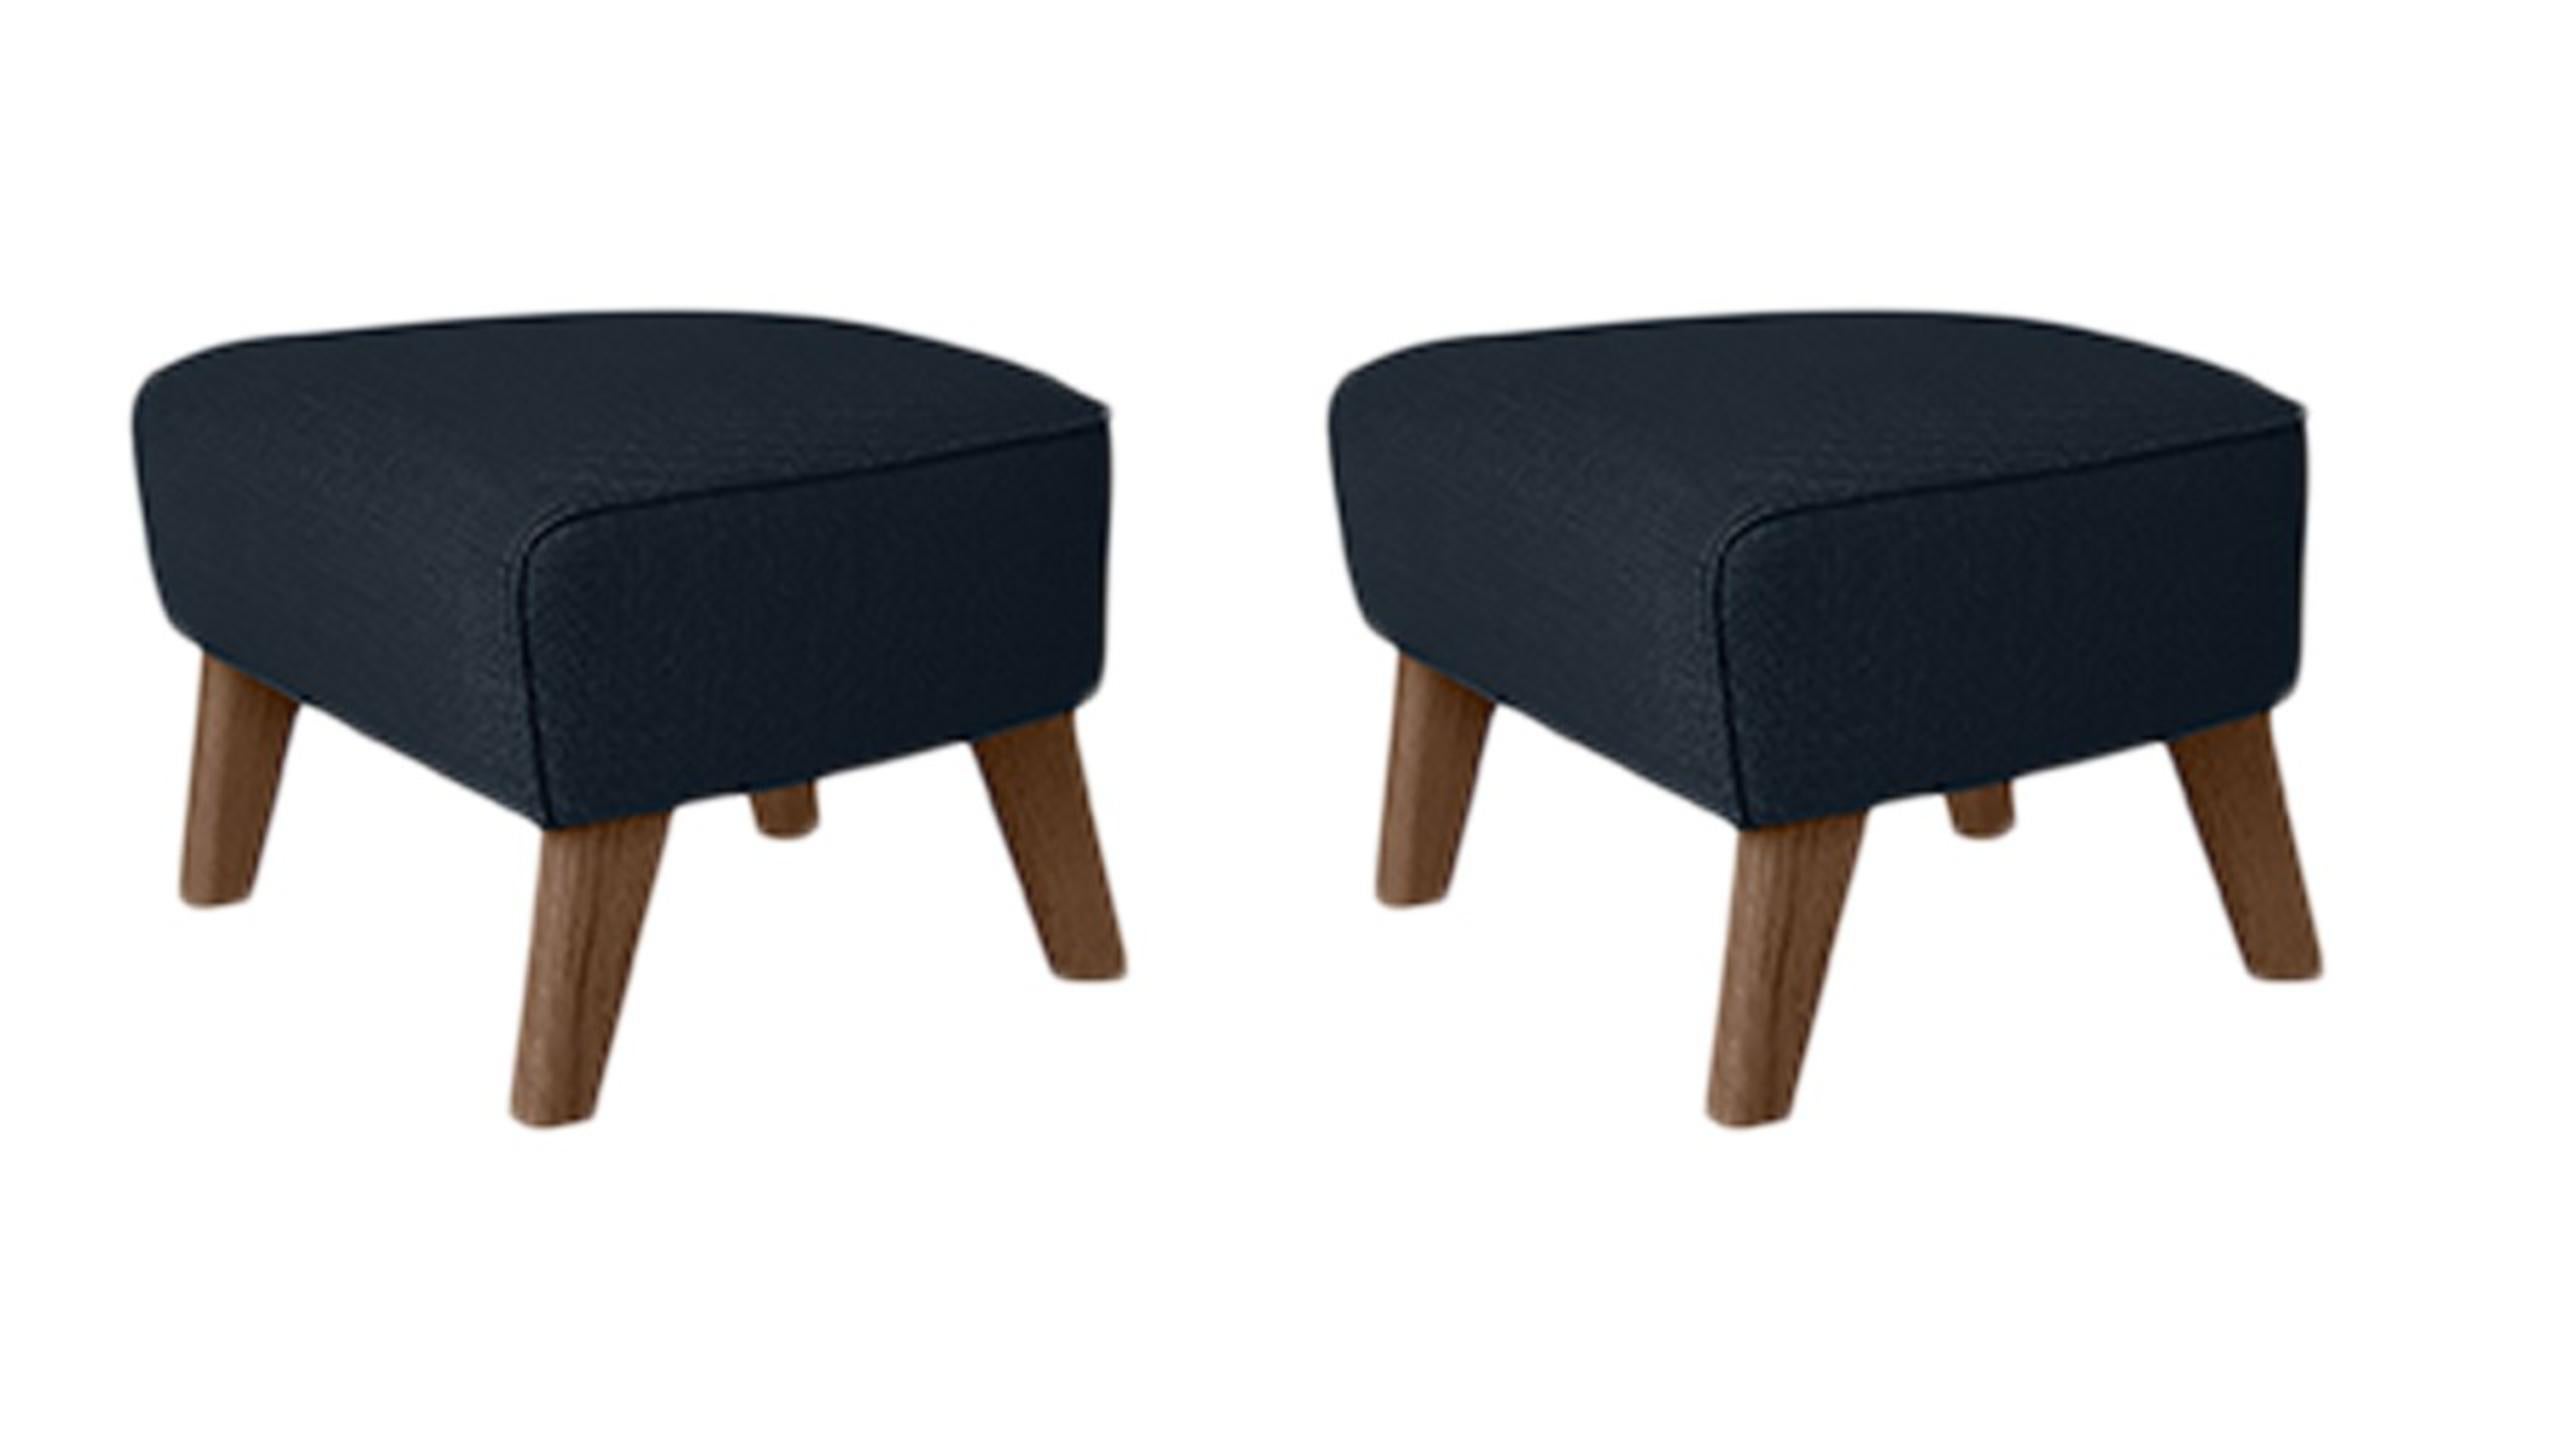 Set of 2 blue, smoked Oak Raf Simons Vidar 3 My Own Chair footstools by Lassen
Dimensions: w 56 x d 58 x h 40 cm 
Materials: Textile
Also Available: Other colors available.

The My Own Chair footstool has been designed in the same spirit as